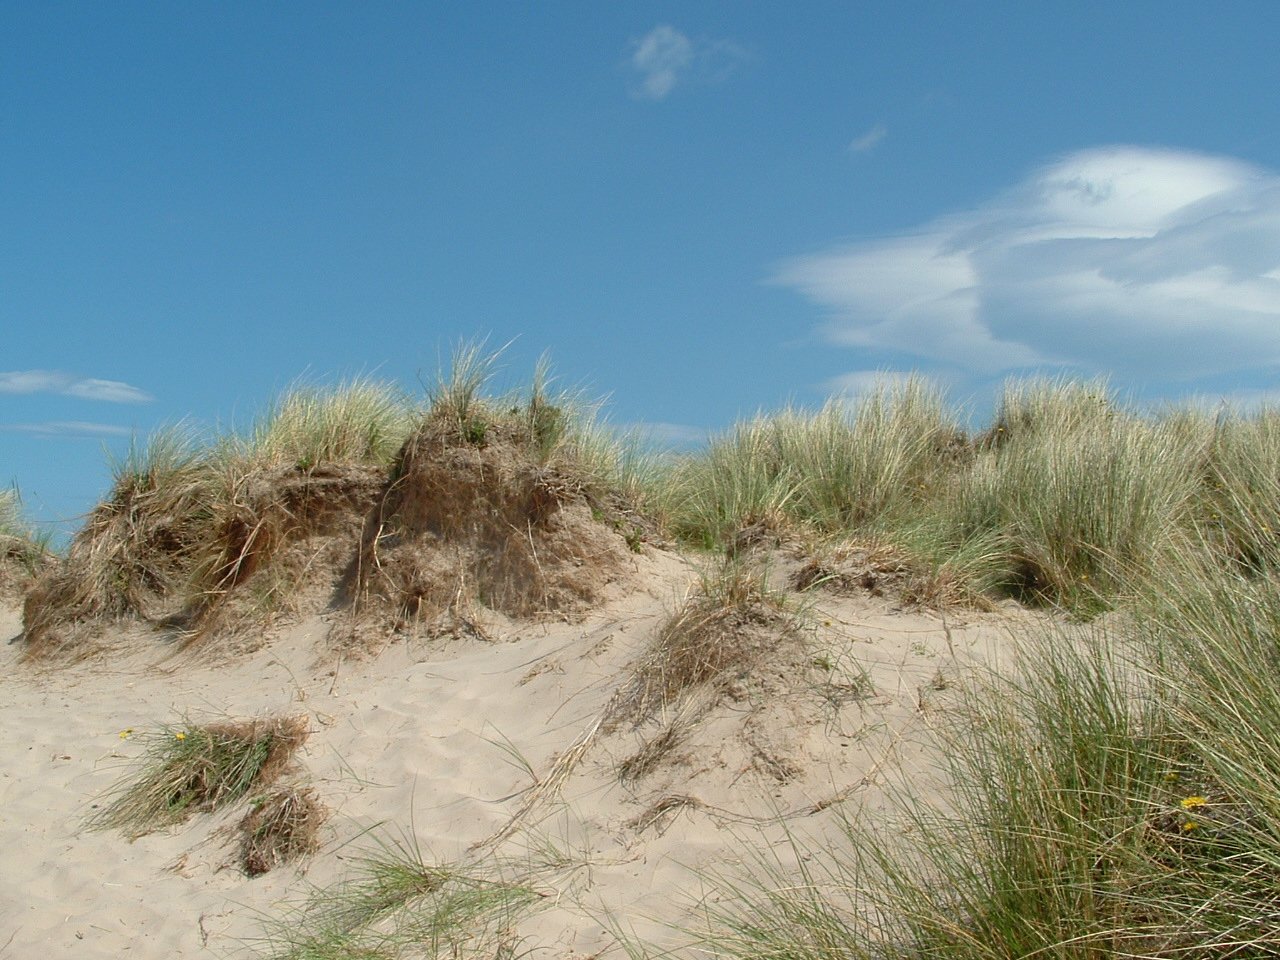 the sand dunes are completely covered in grass